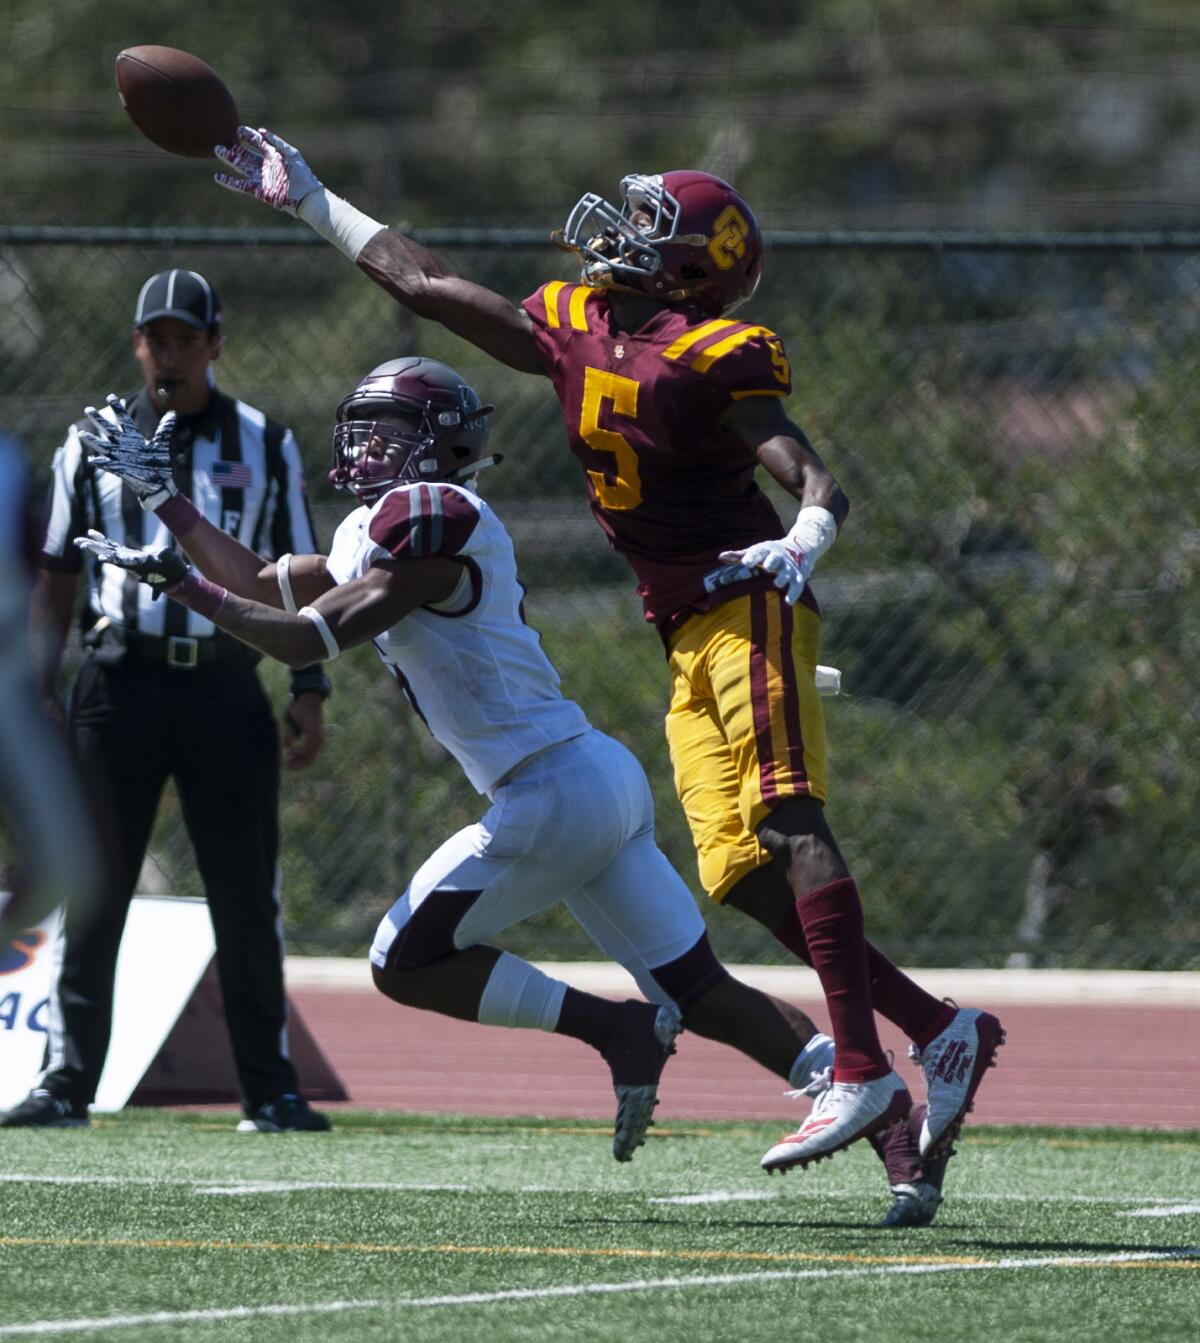 Glendale Community College’s Torres Ingraham breaks up a pass intended for Antelope Valley College’s Jaylen Sargent during Saturday's game at GCC. (Photo by Miguel Vasconcellos)